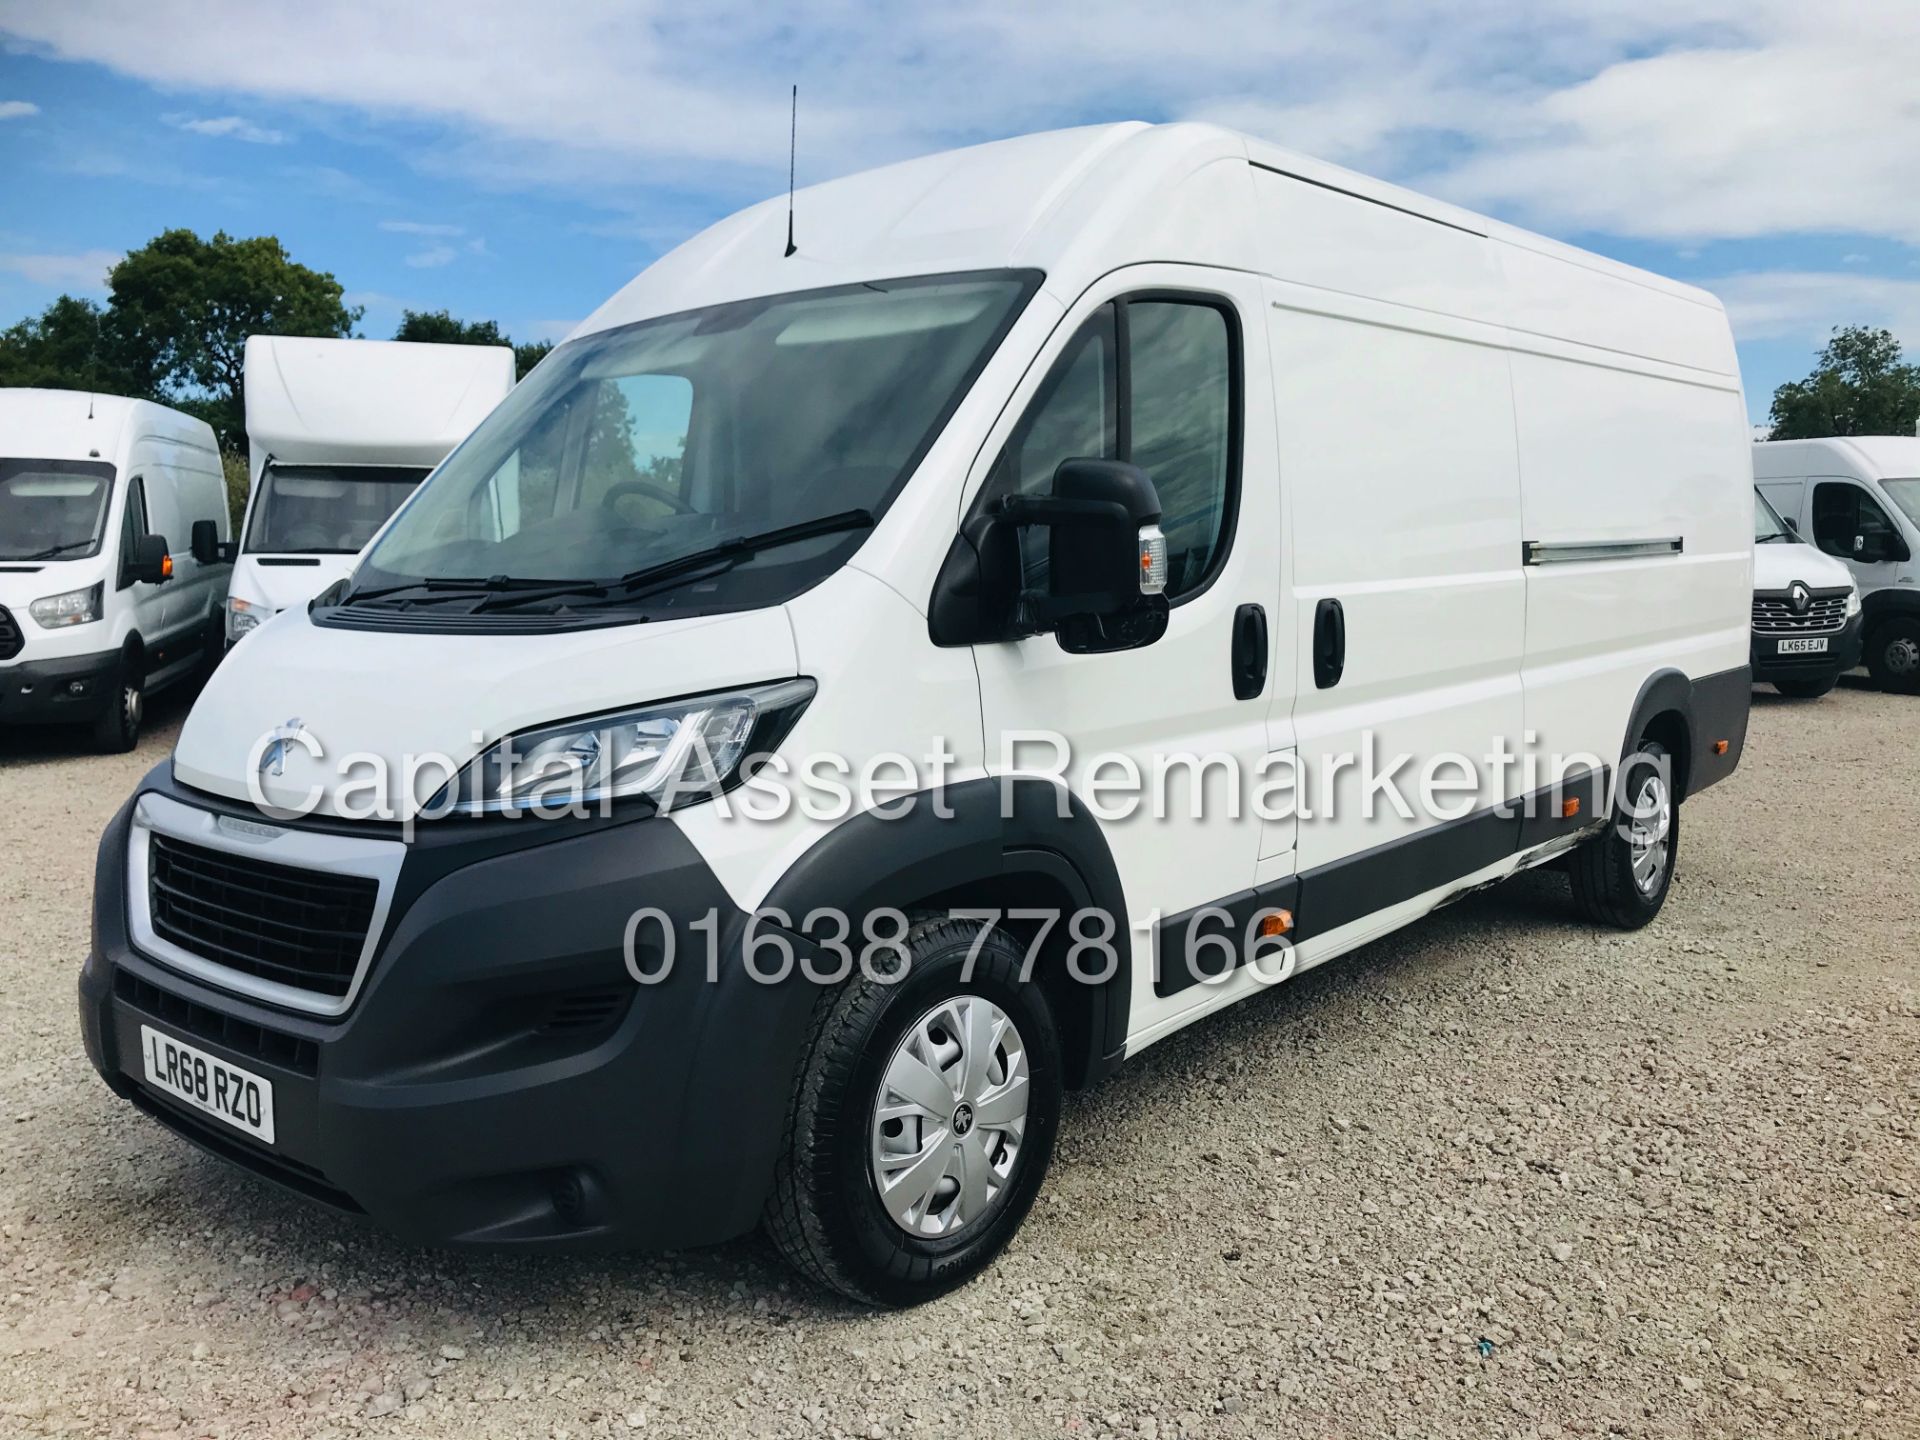 (ON SALE) PEUGEOT BOXER 2.0 BLUE-HDI "PROFESSIONAL" L4 "MAXI" 1 OWNER (2019 MODEL) AIR CON - SAT NAV - Image 5 of 23